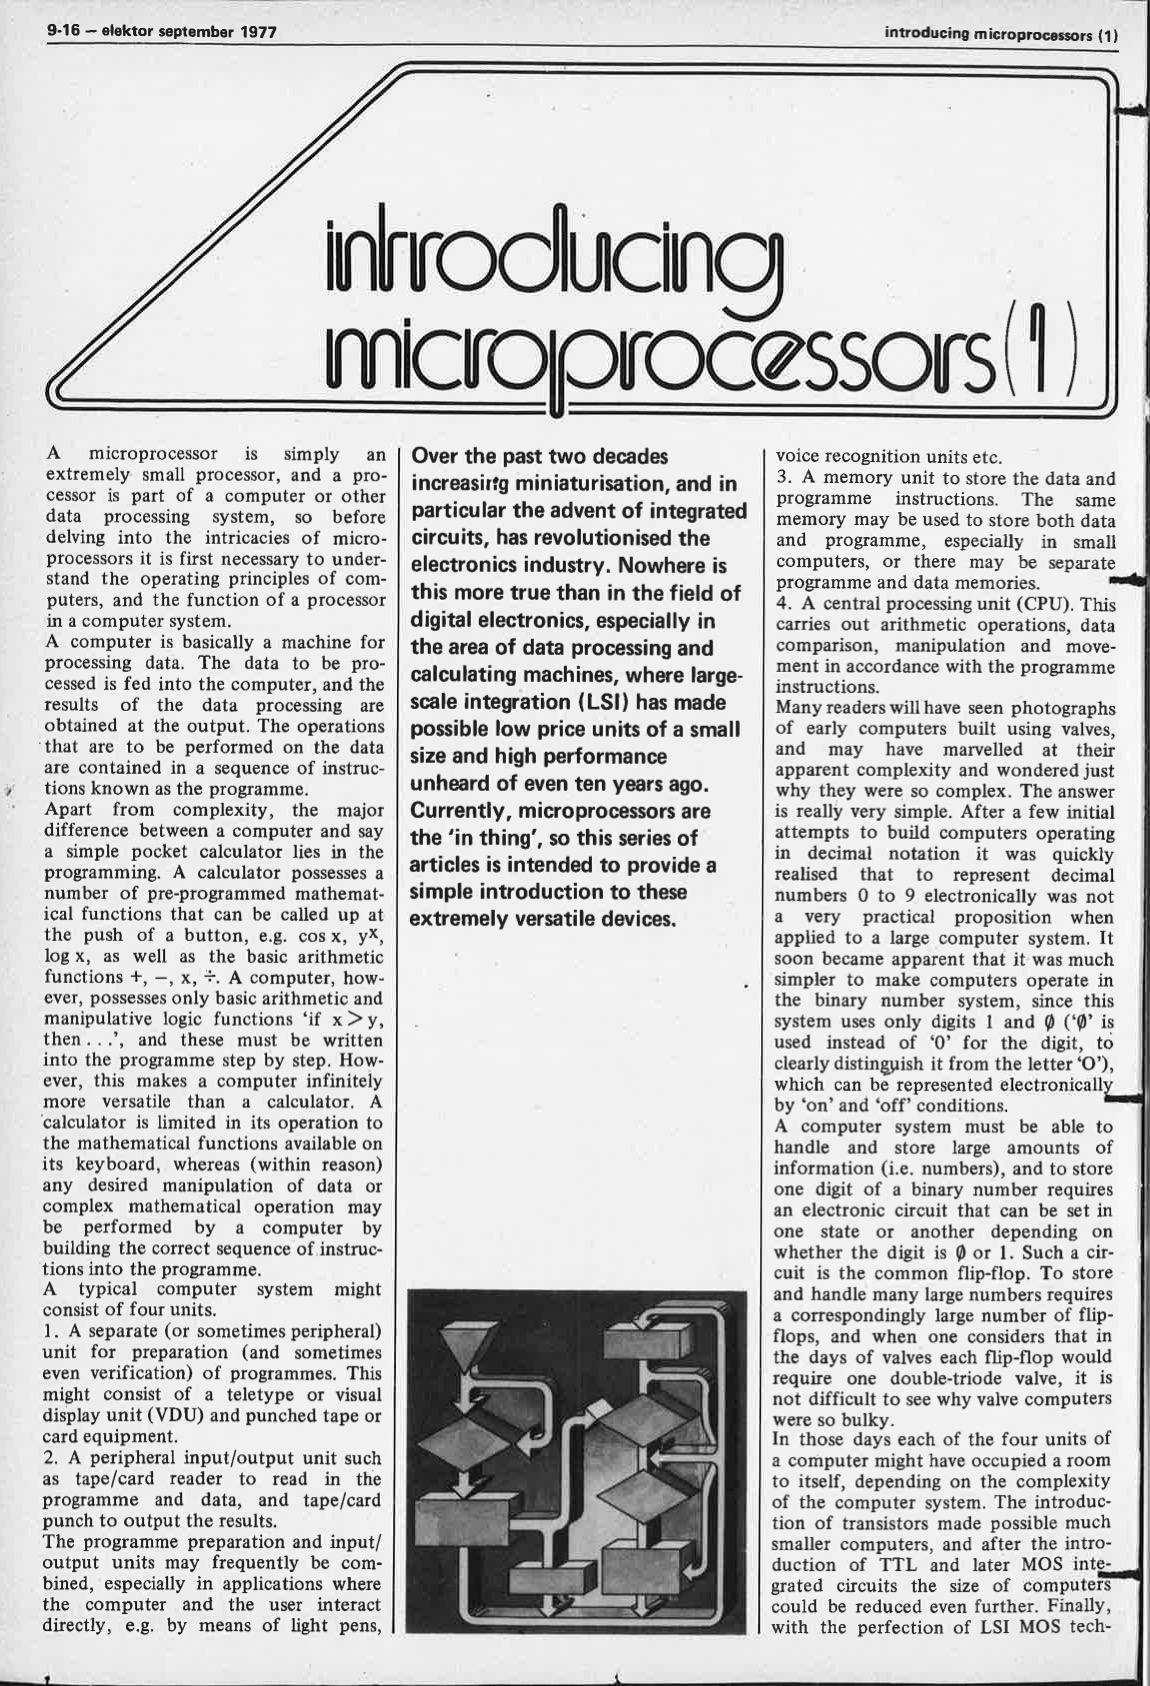 introducing microprocessors (1)